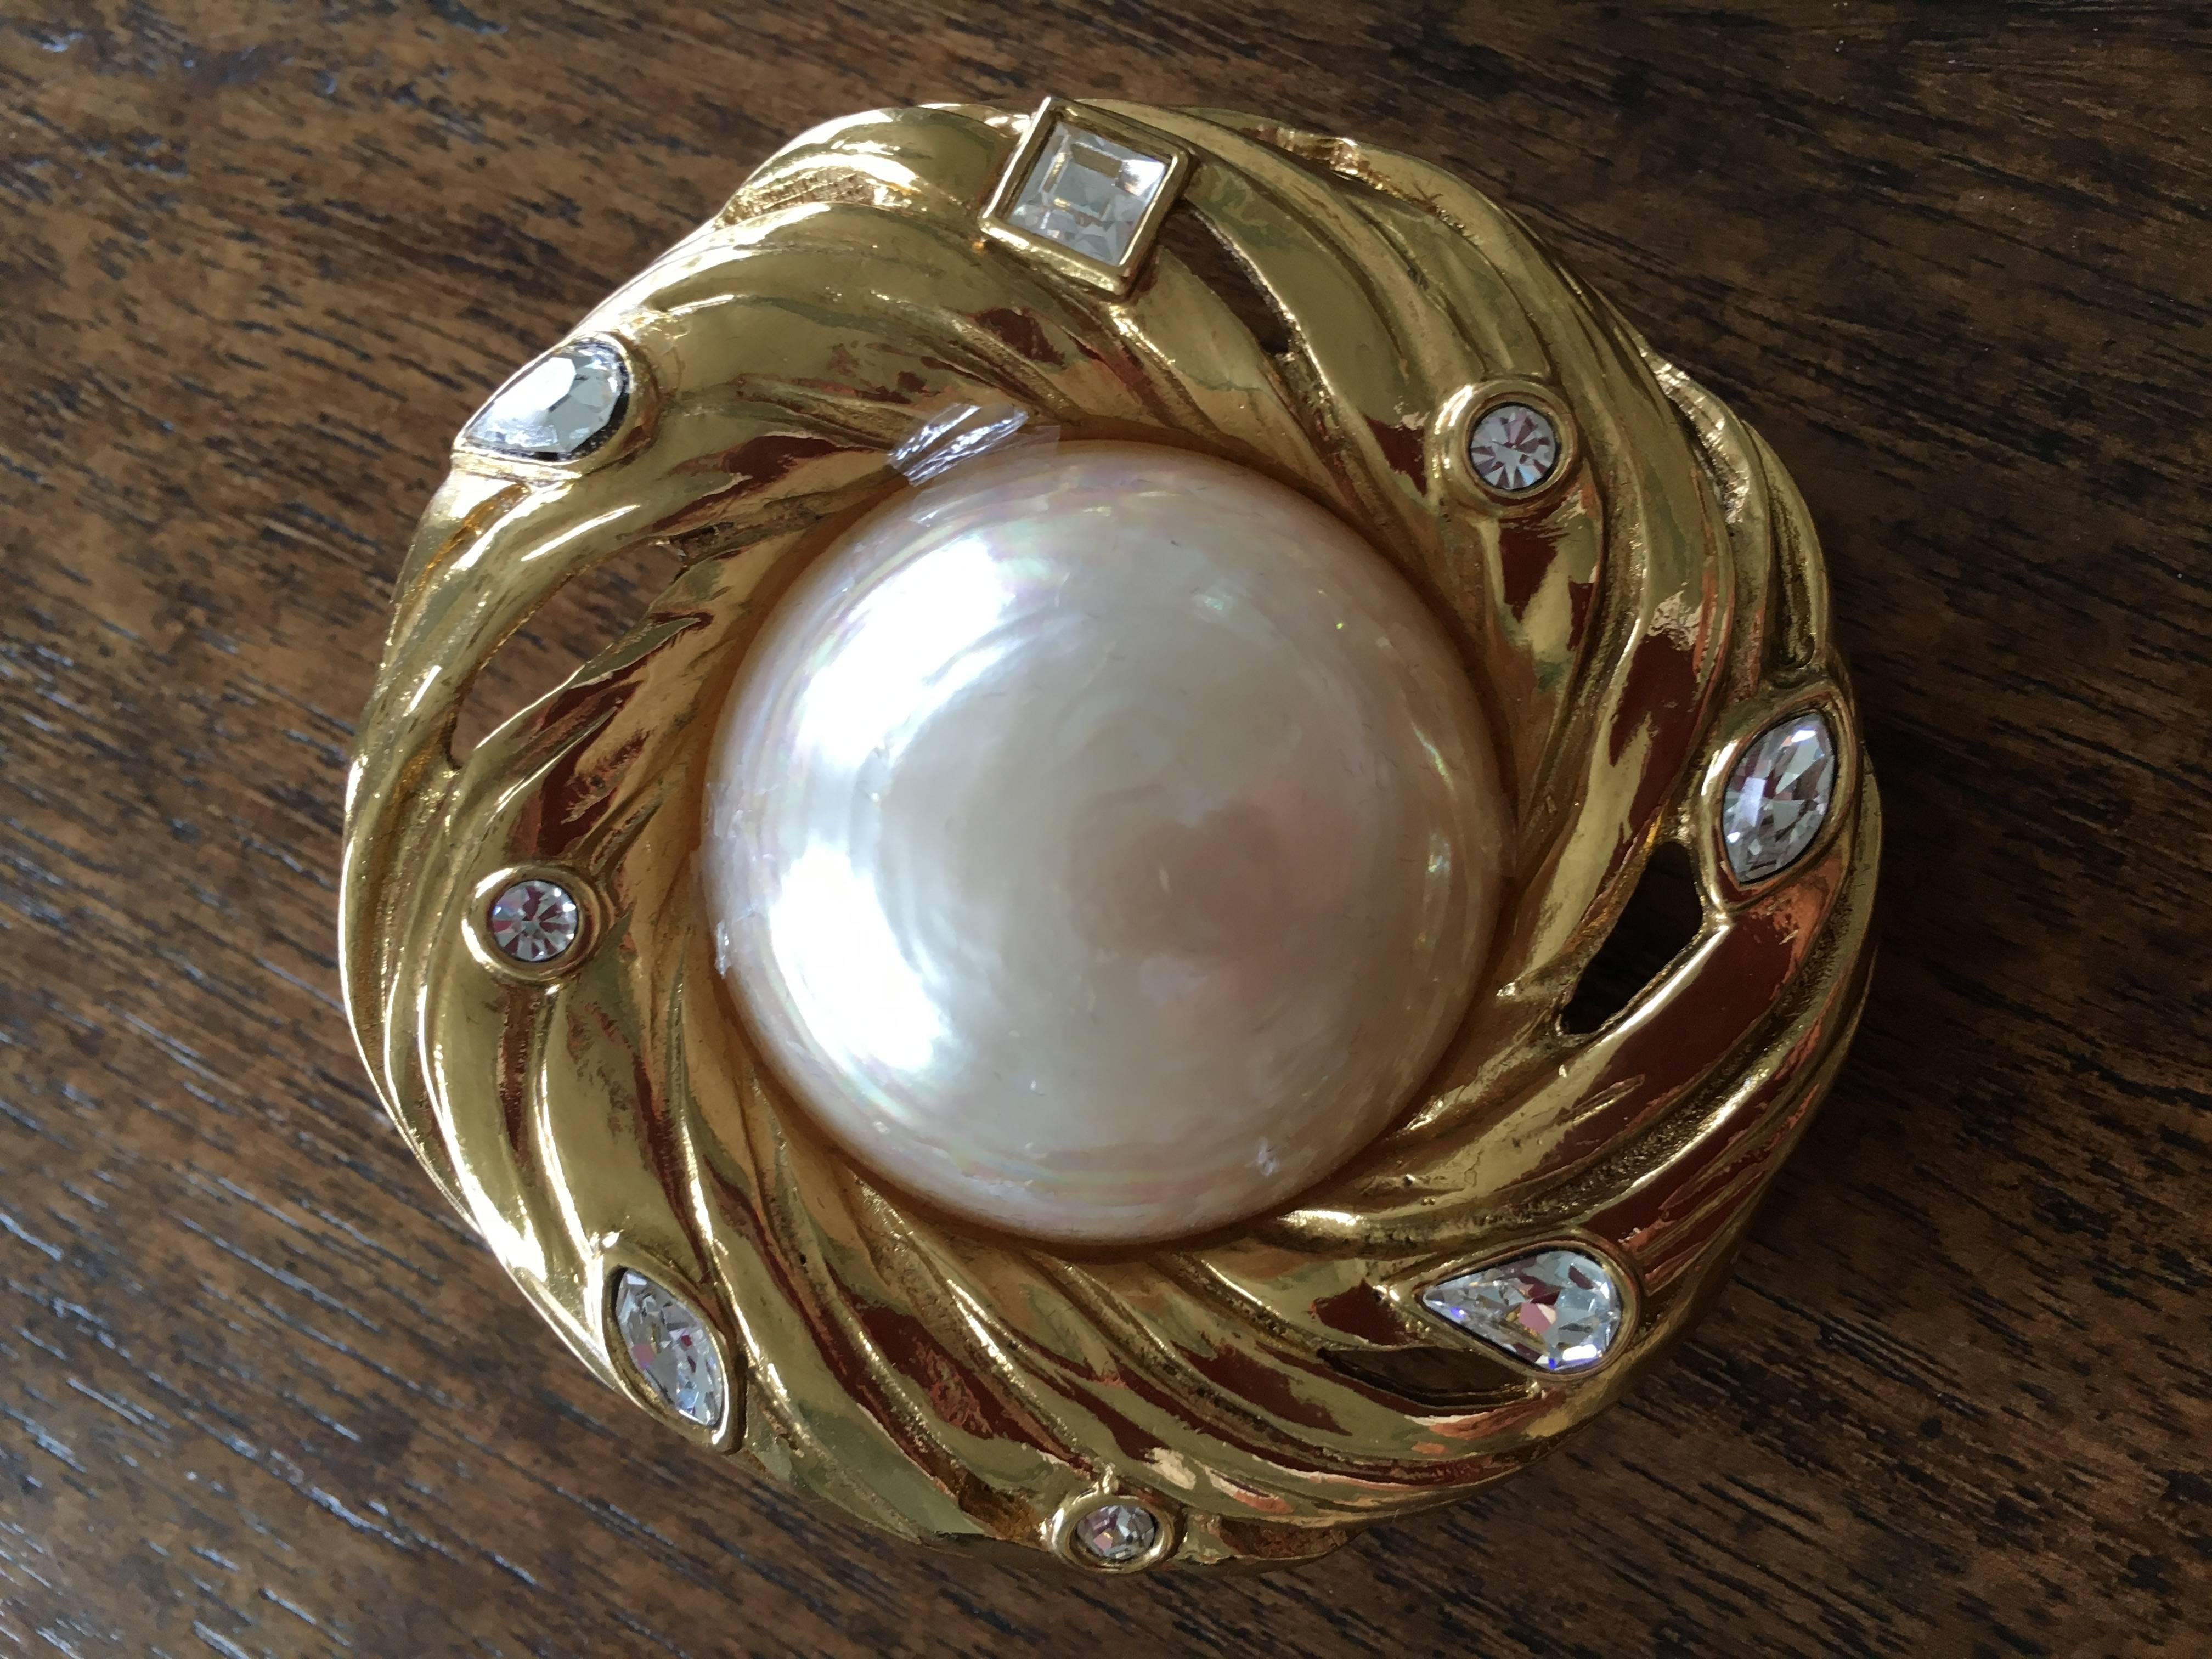 Yves Saint Laurent Vintage Large Pearl and Crystal Brooch / Pendant In Excellent Condition For Sale In Cloverdale, CA